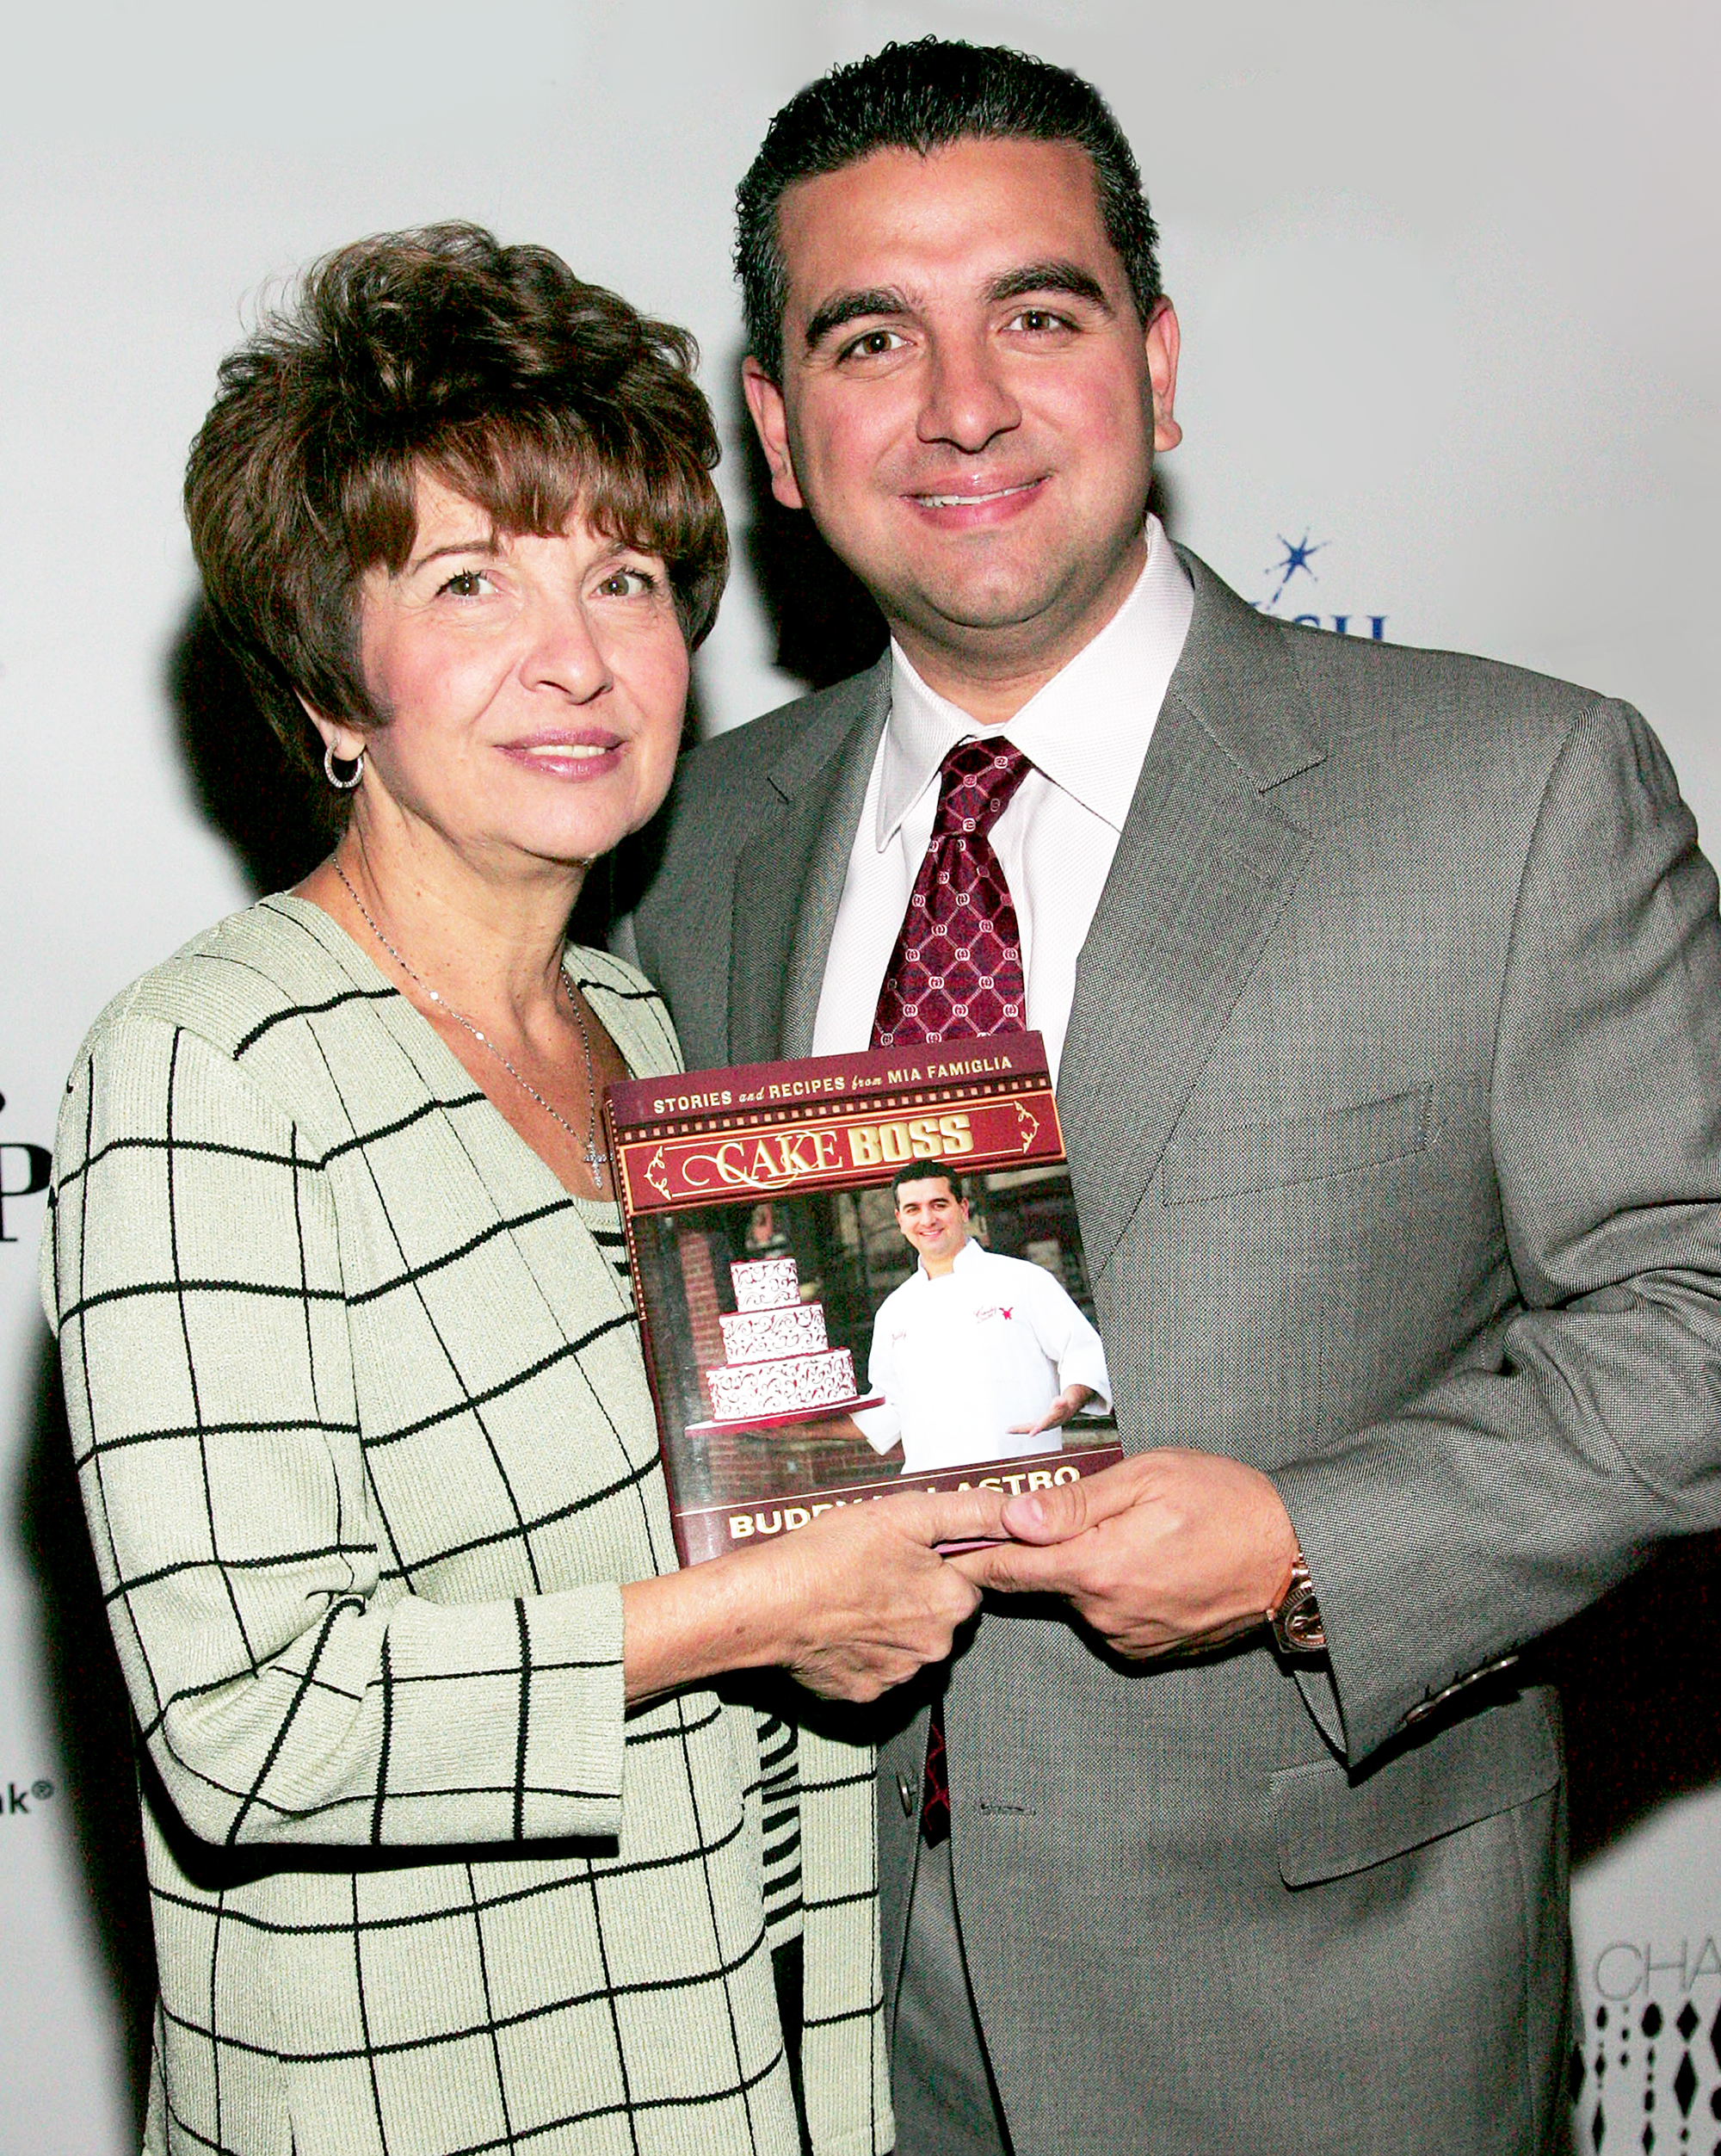 Who Is Buddy Valastro's Wife Lisa Valastro? Meet His Spouse